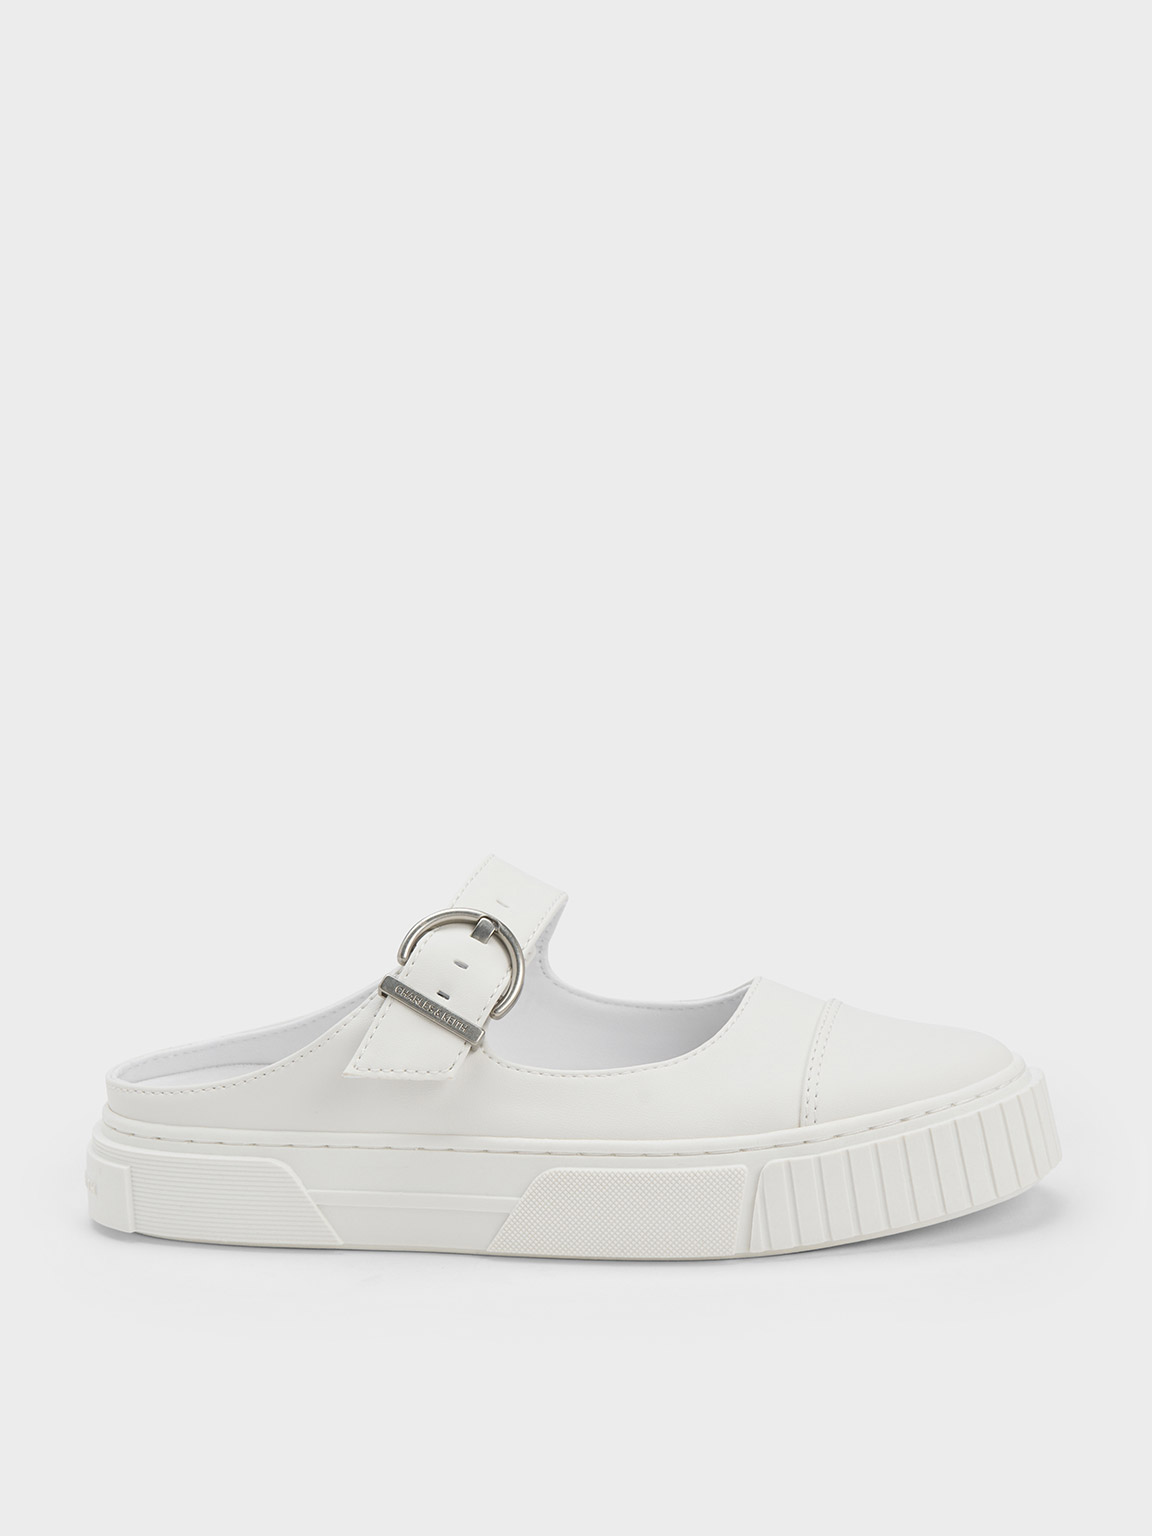 Charles & Keith Buckled Slip-on Sneakers In White